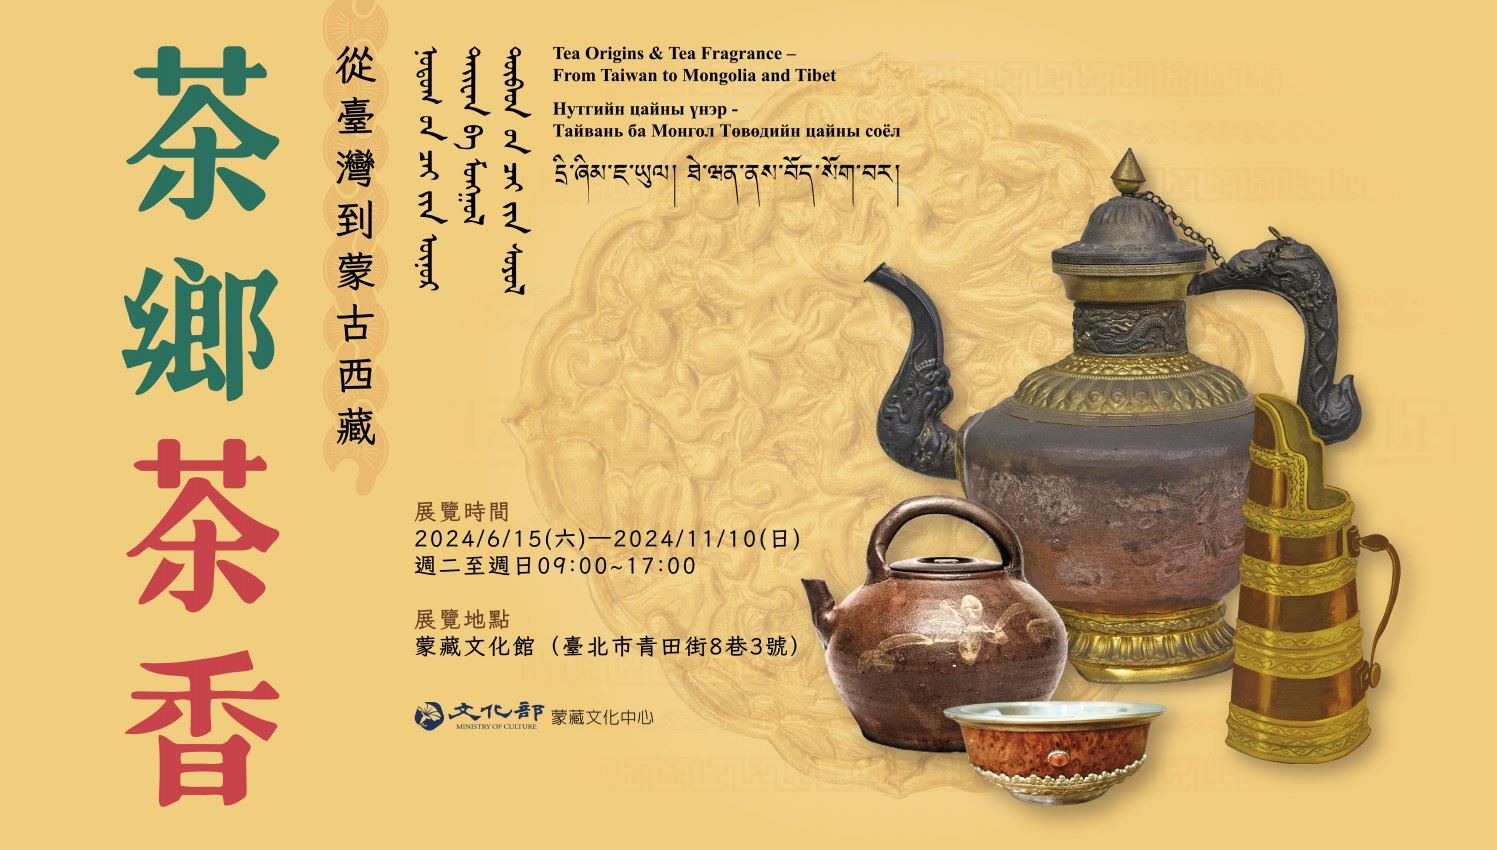 MTCC’s exhibition showcases tea culture from Taiwan, Mongolia, and Tibet